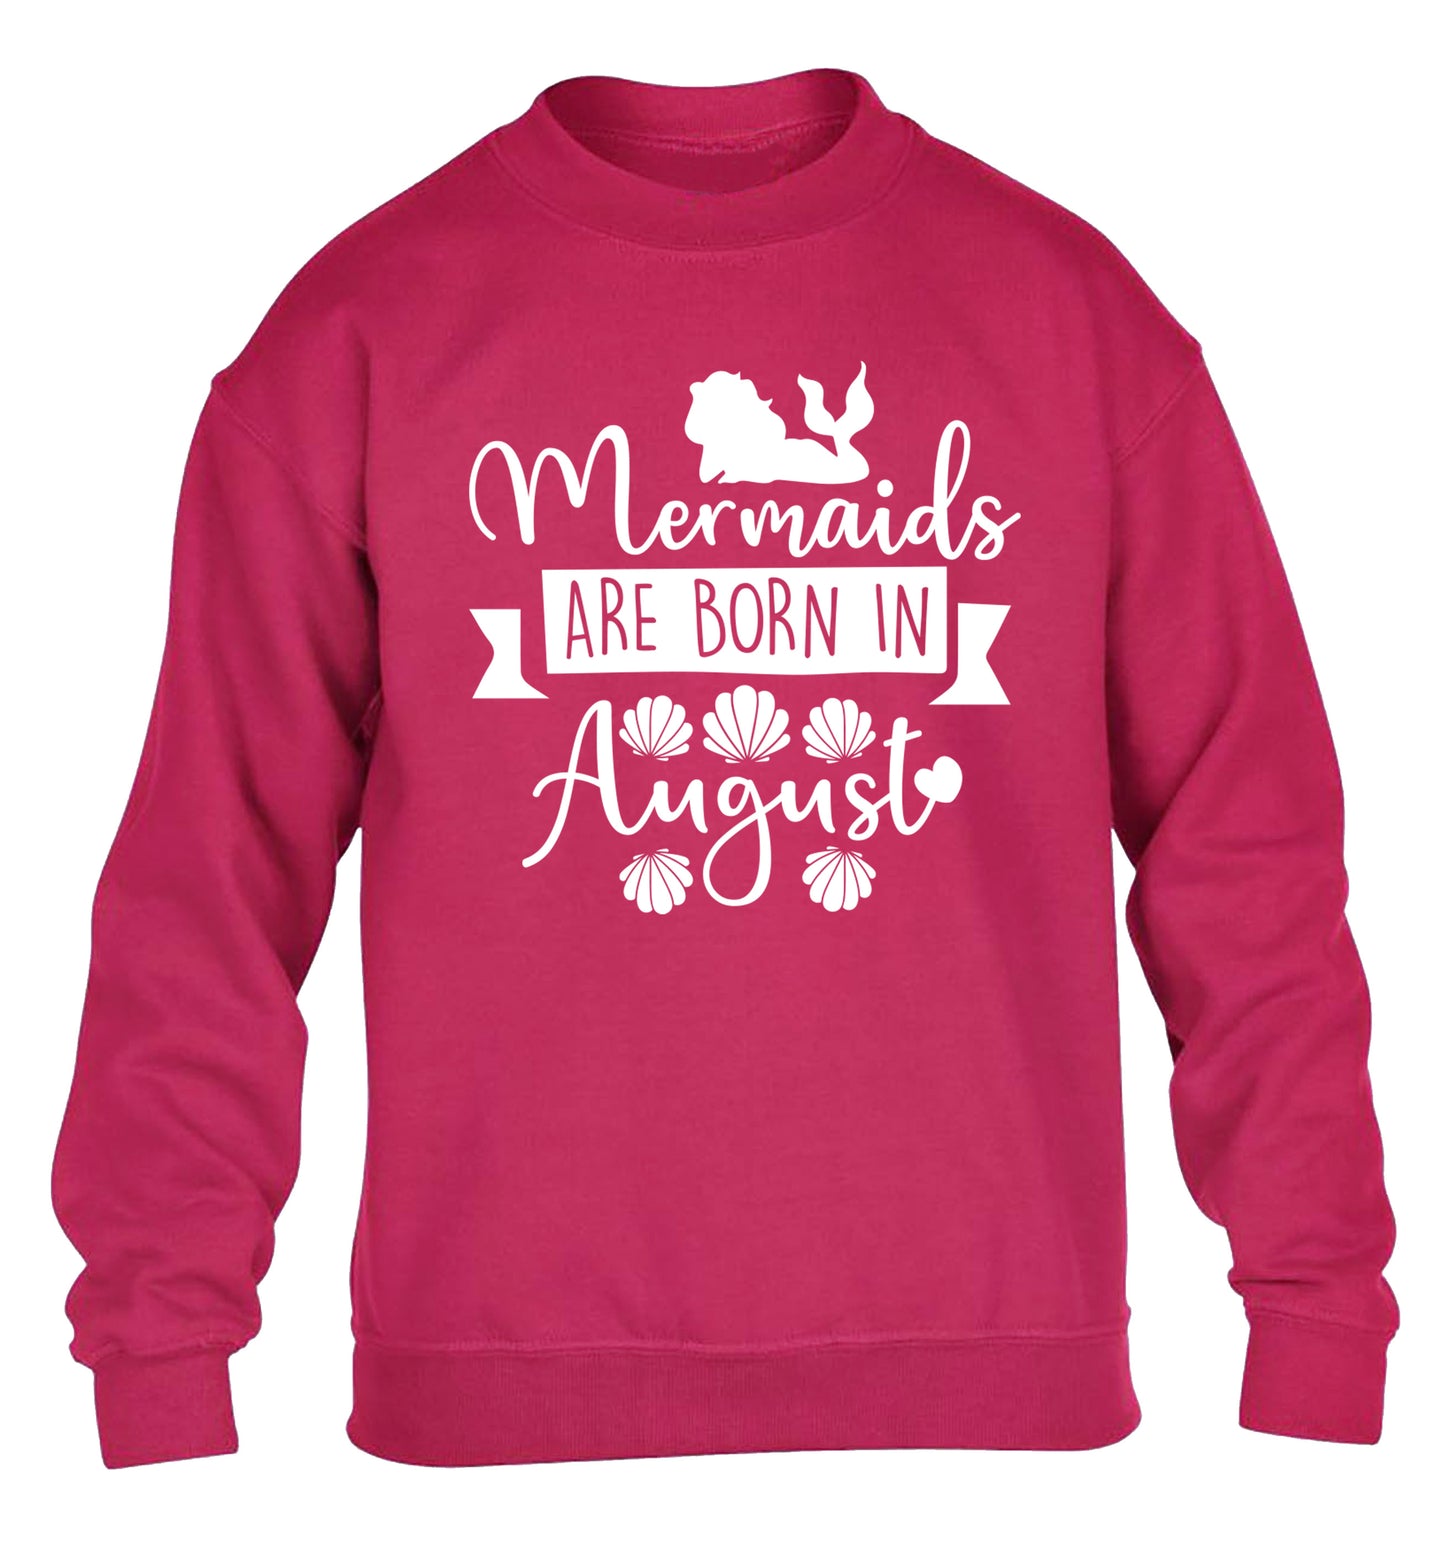 Mermaids are born in August children's pink sweater 12-13 Years